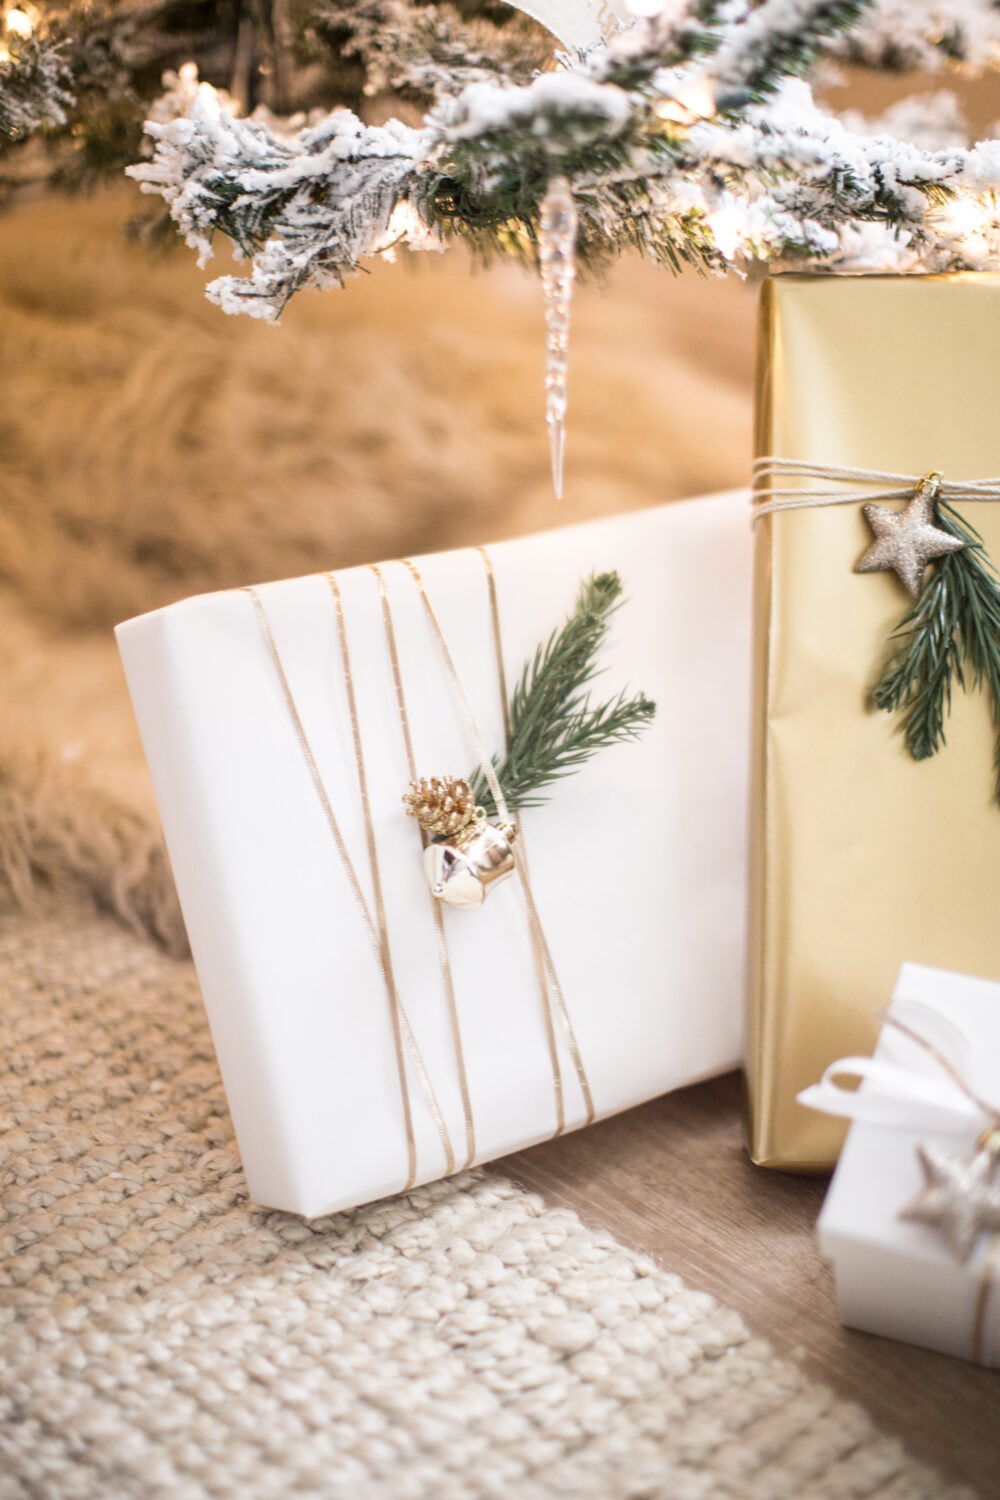 Gift wrapping ideas in gold and white